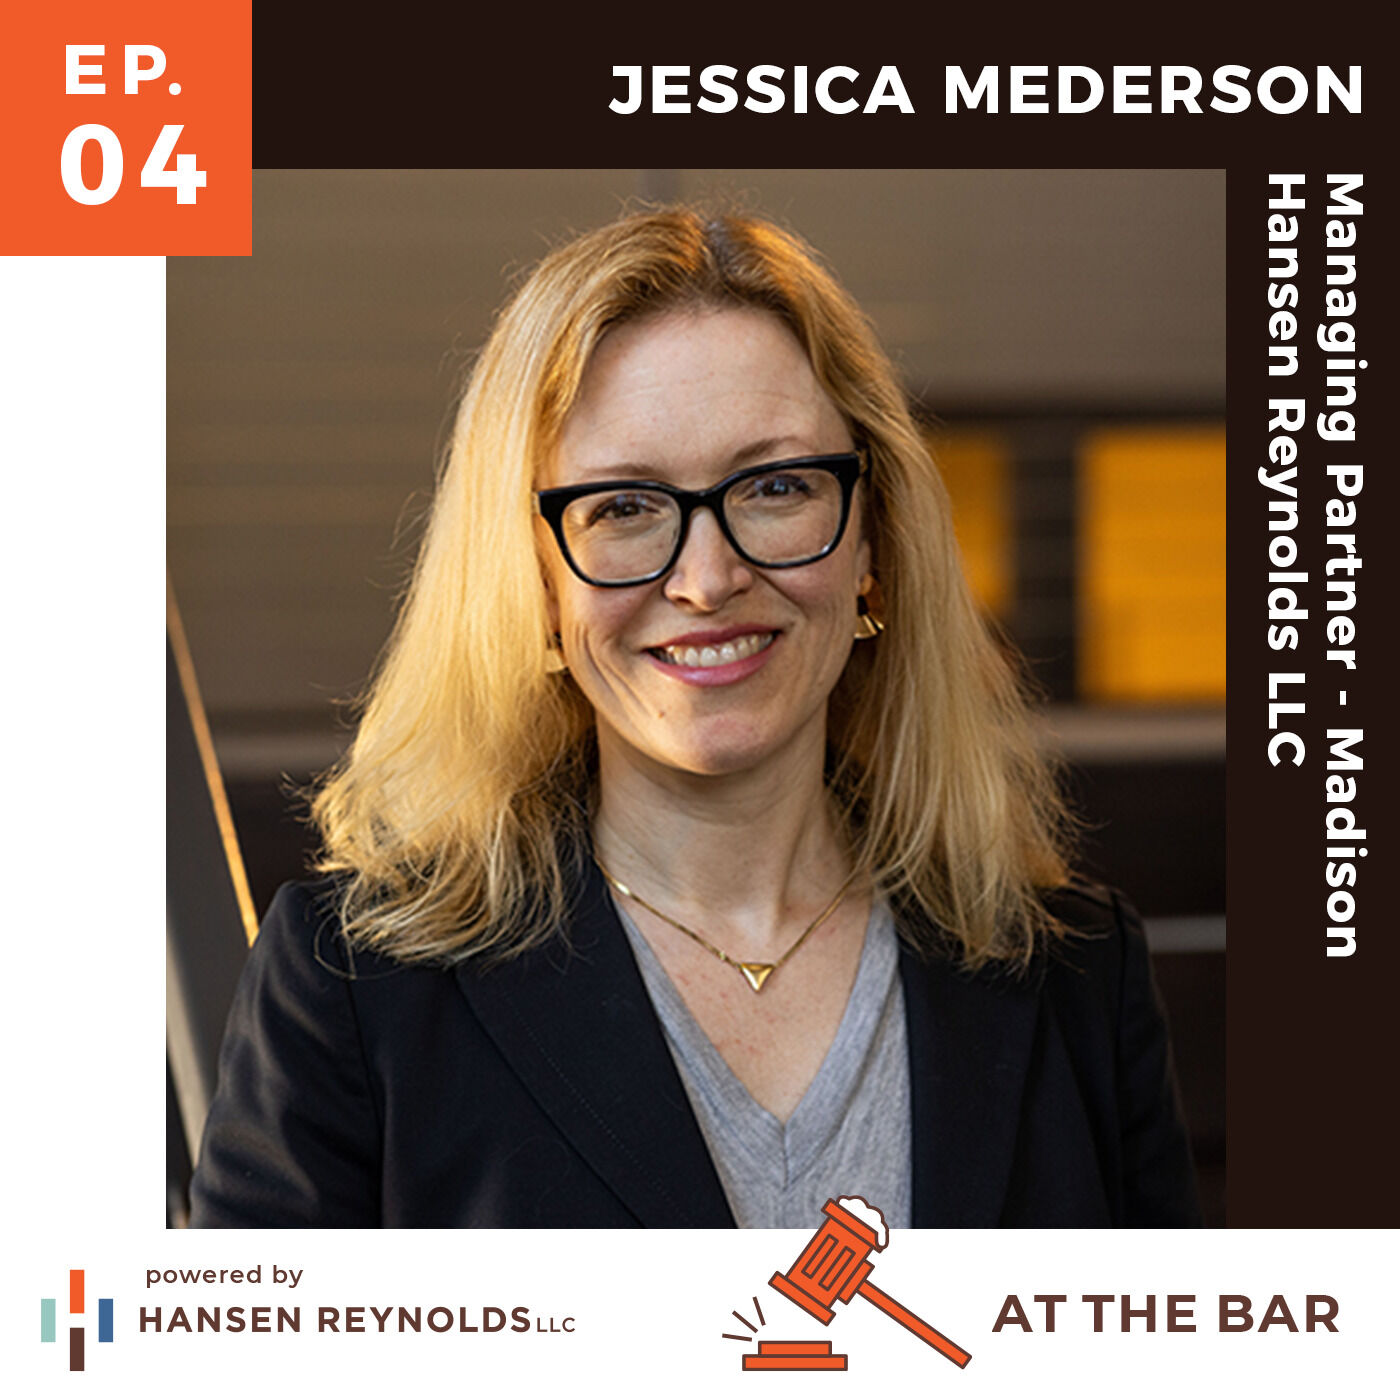 At the Bar episode four cover with Jessica Mederson